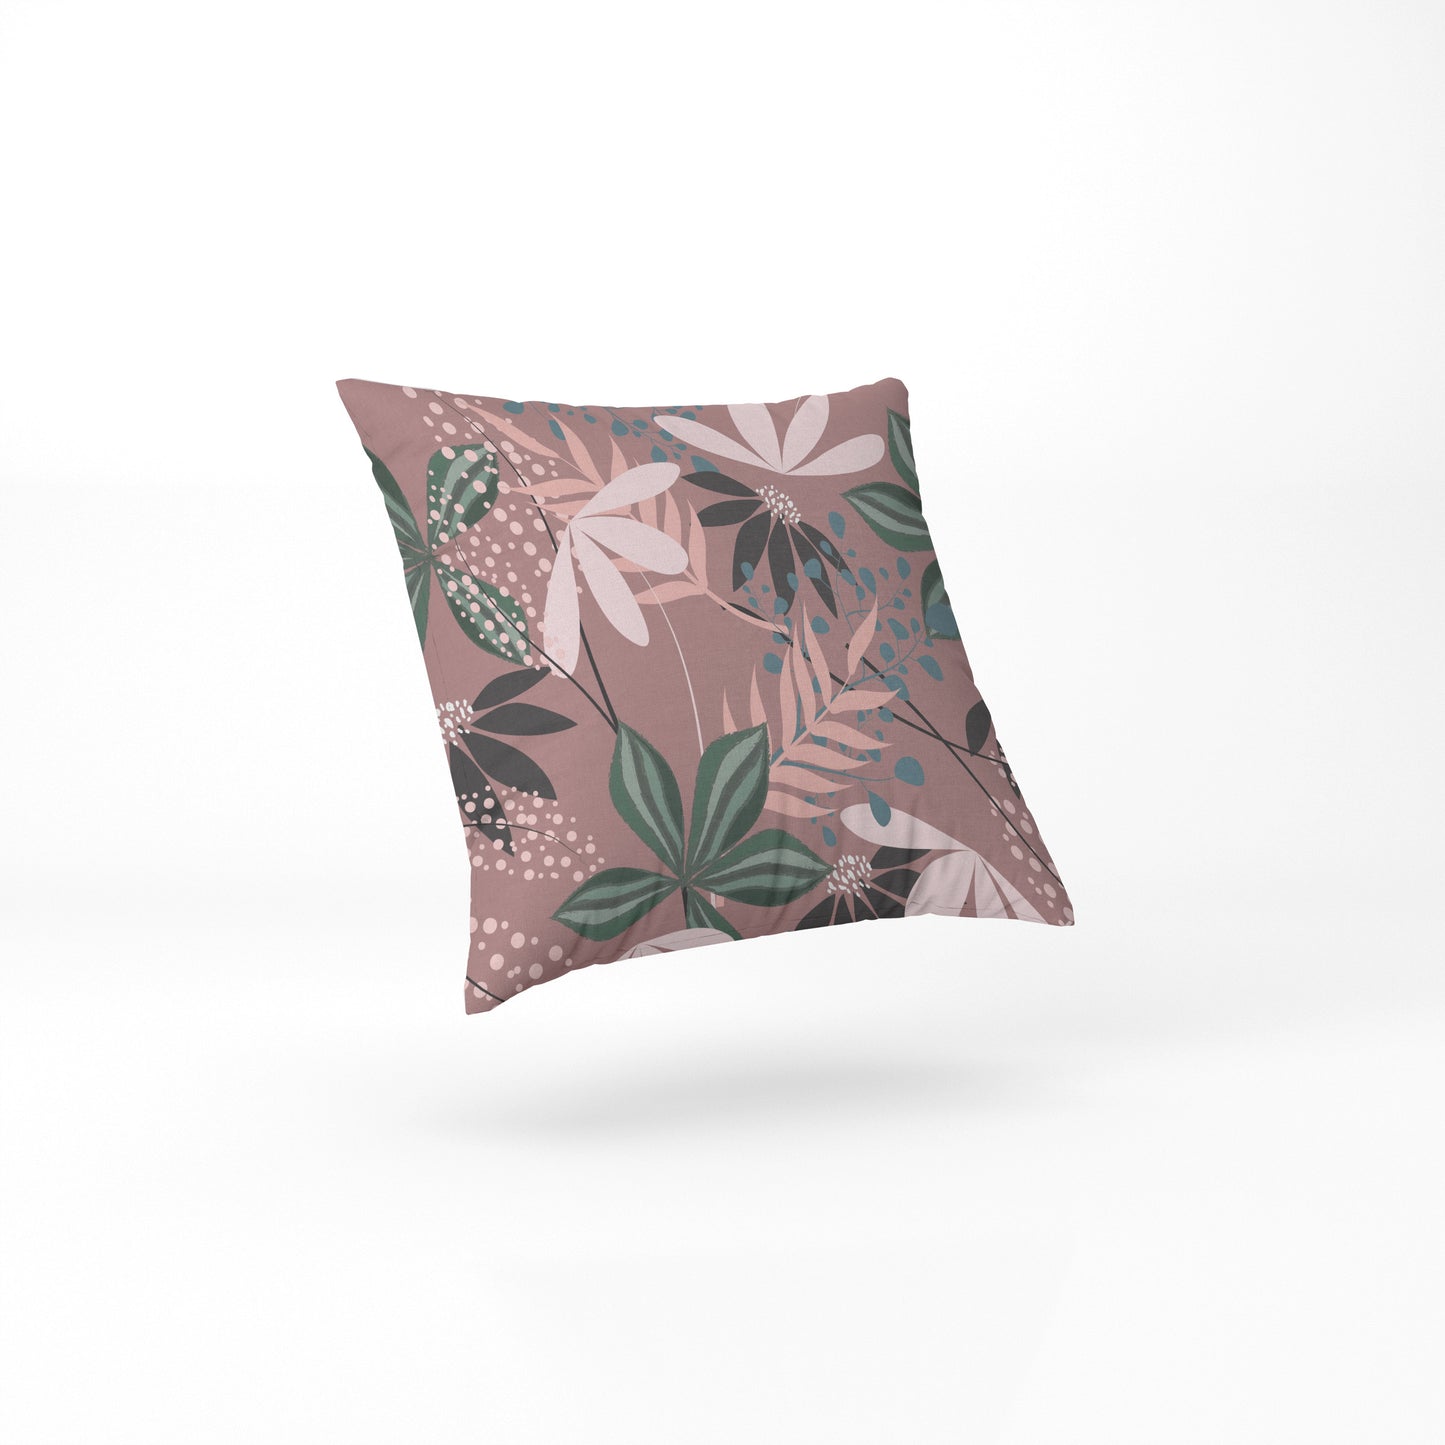 custom Vintage Floral Pillow full sublimation printed in pastel colour